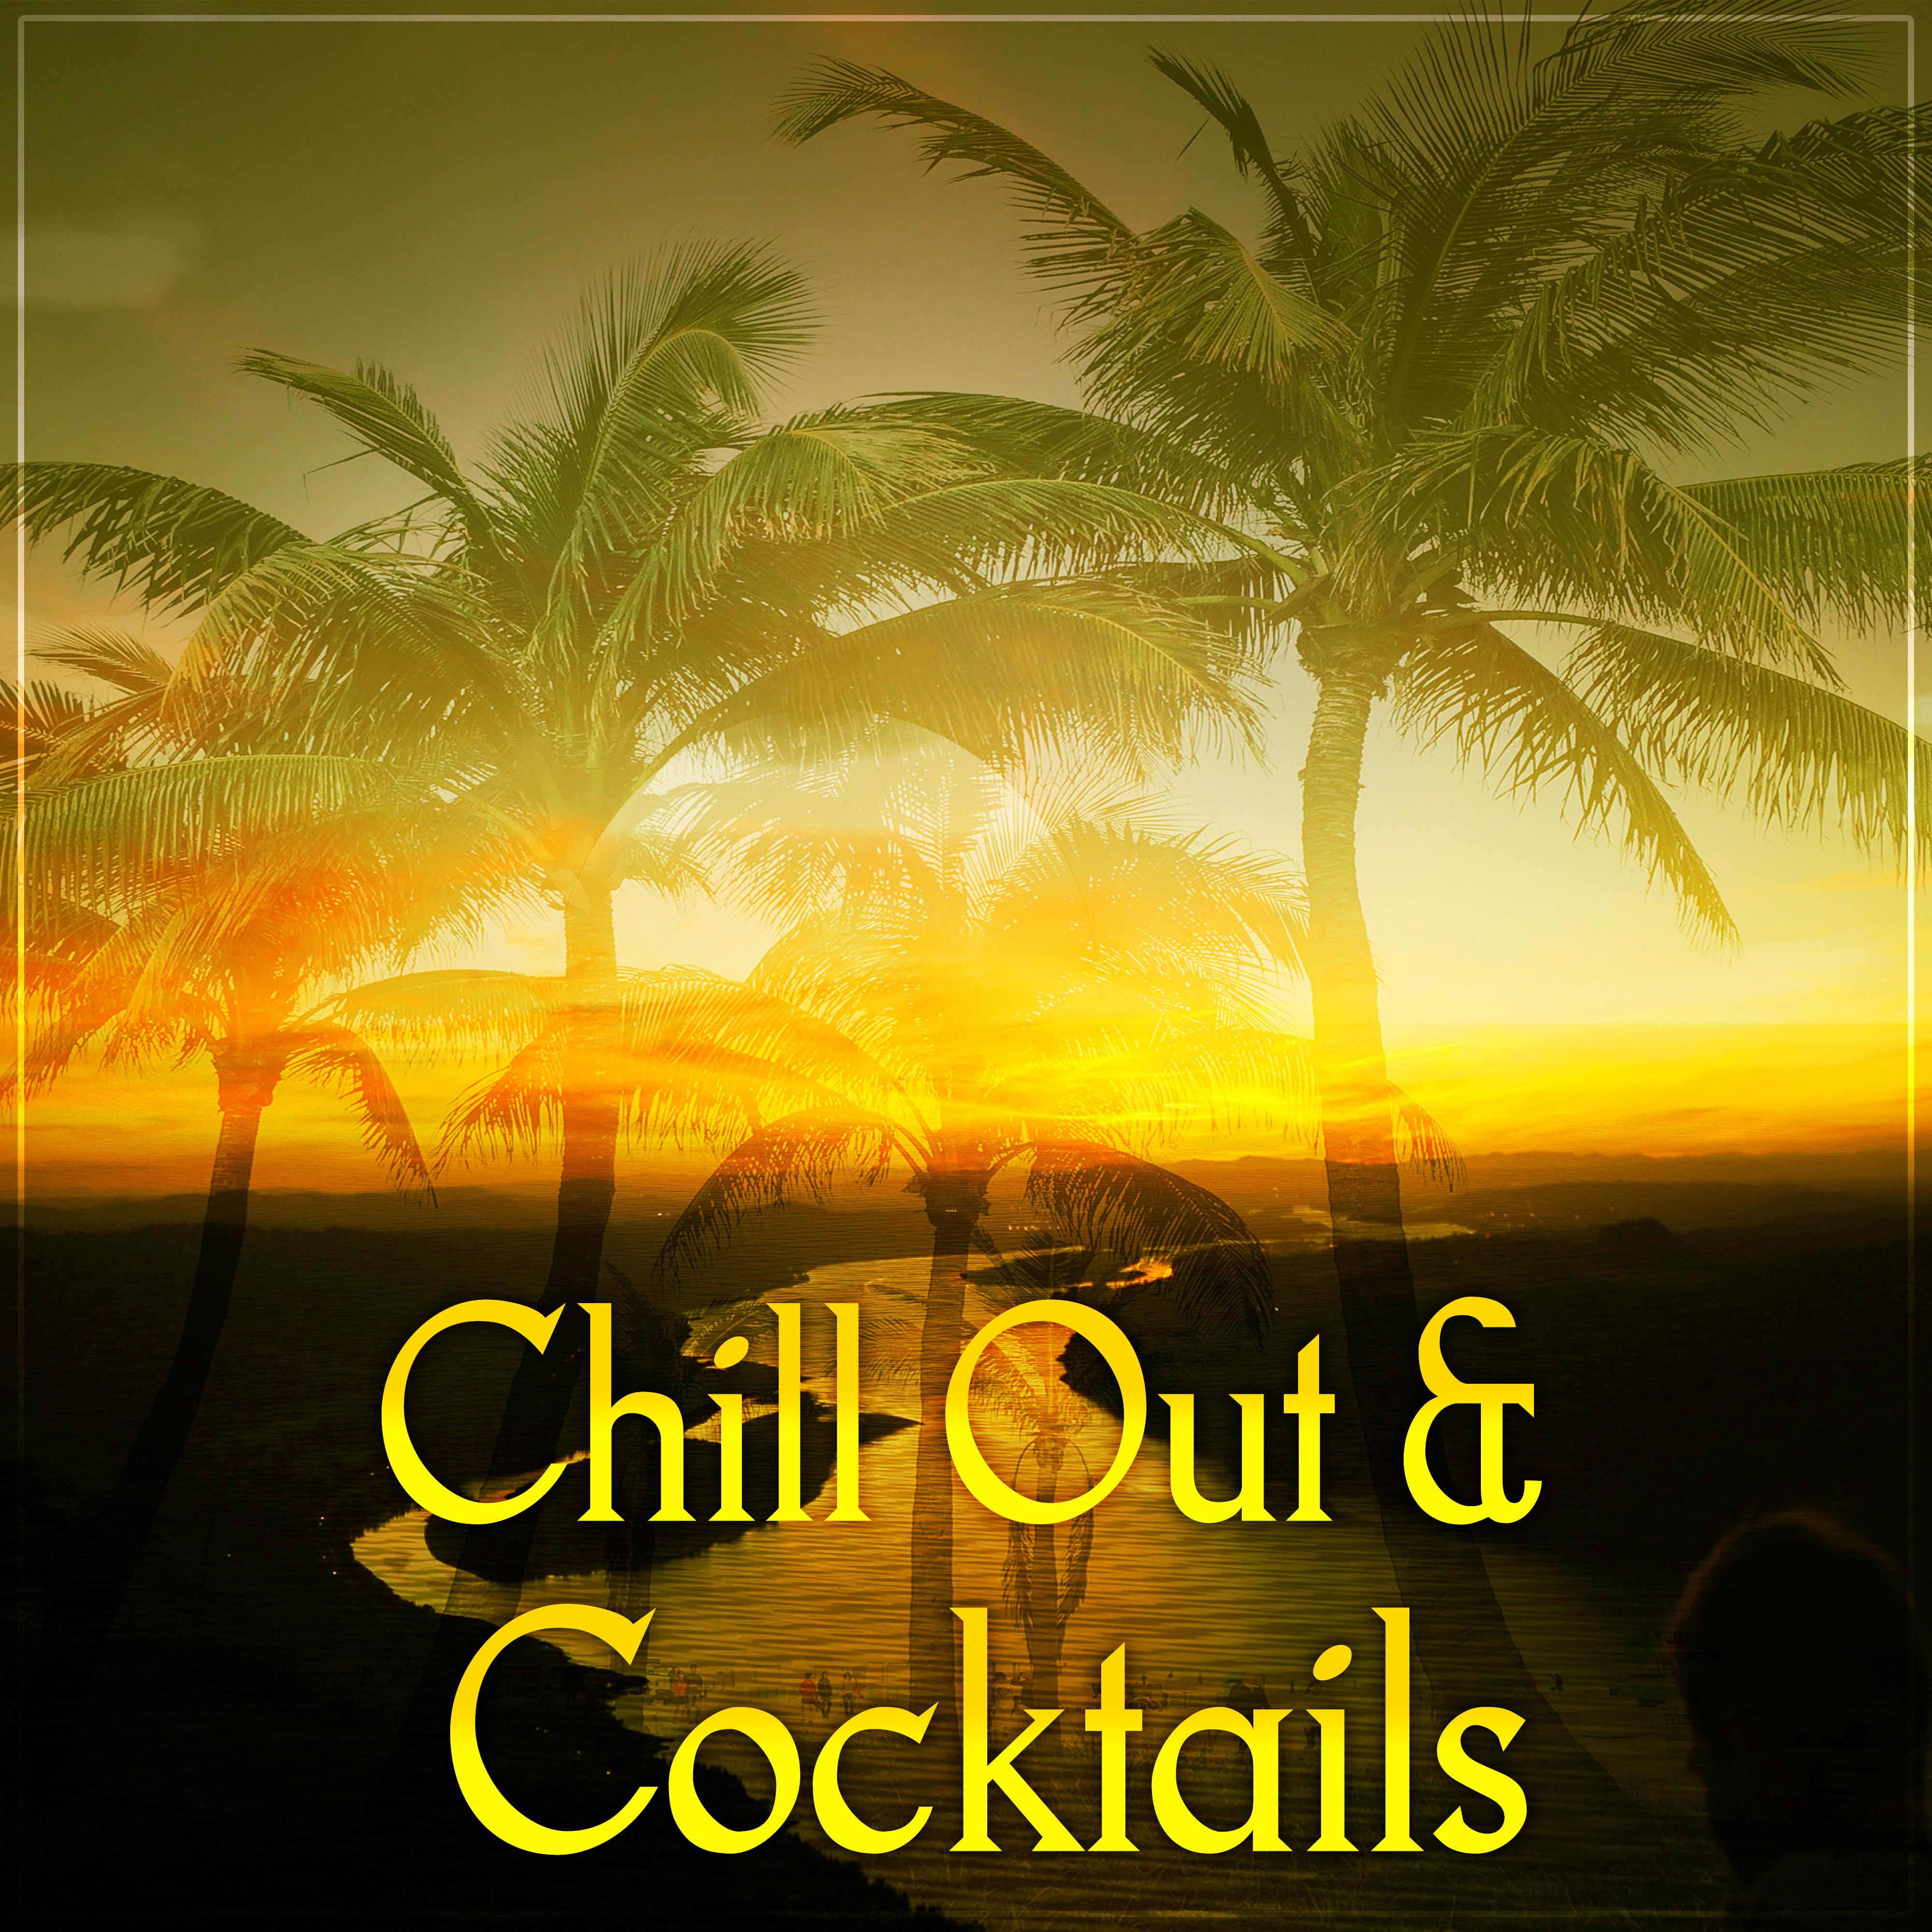 Chill Out  Cocktails  Drink, Smoke  Chill Out, Total Relaxation with Chill Out Sounds